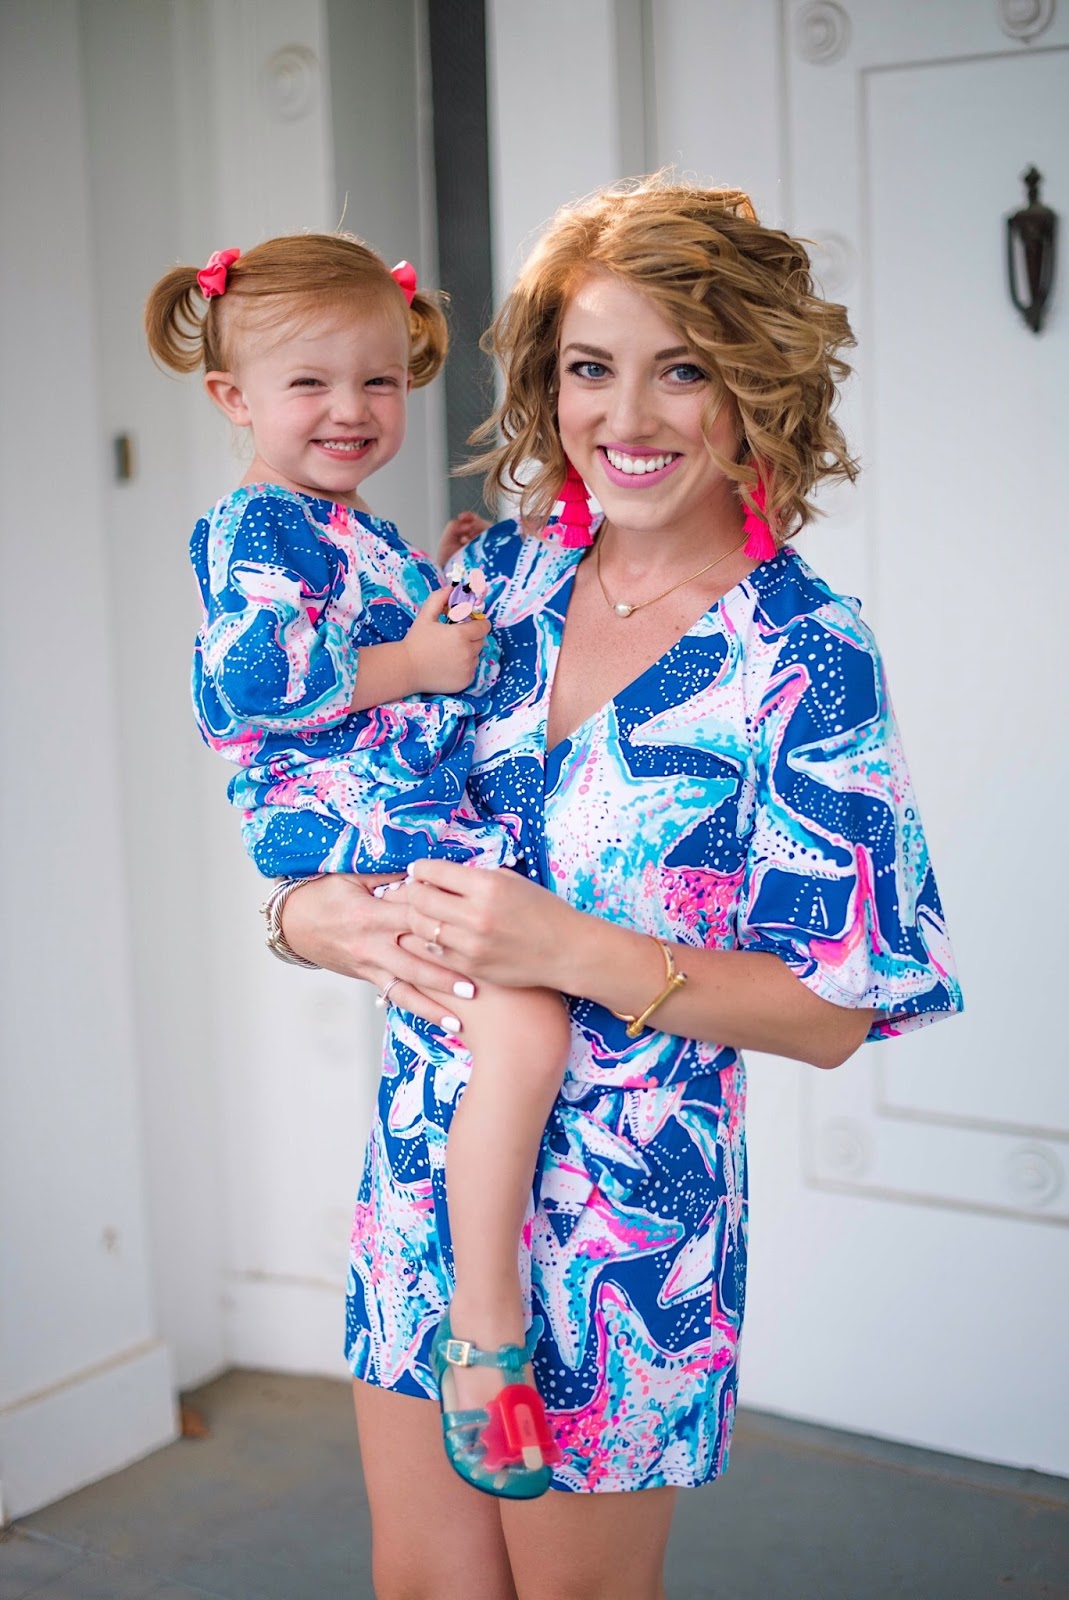 Lilly Pulitzer for July 4th - Click through to see more on Something Delightful Blog!